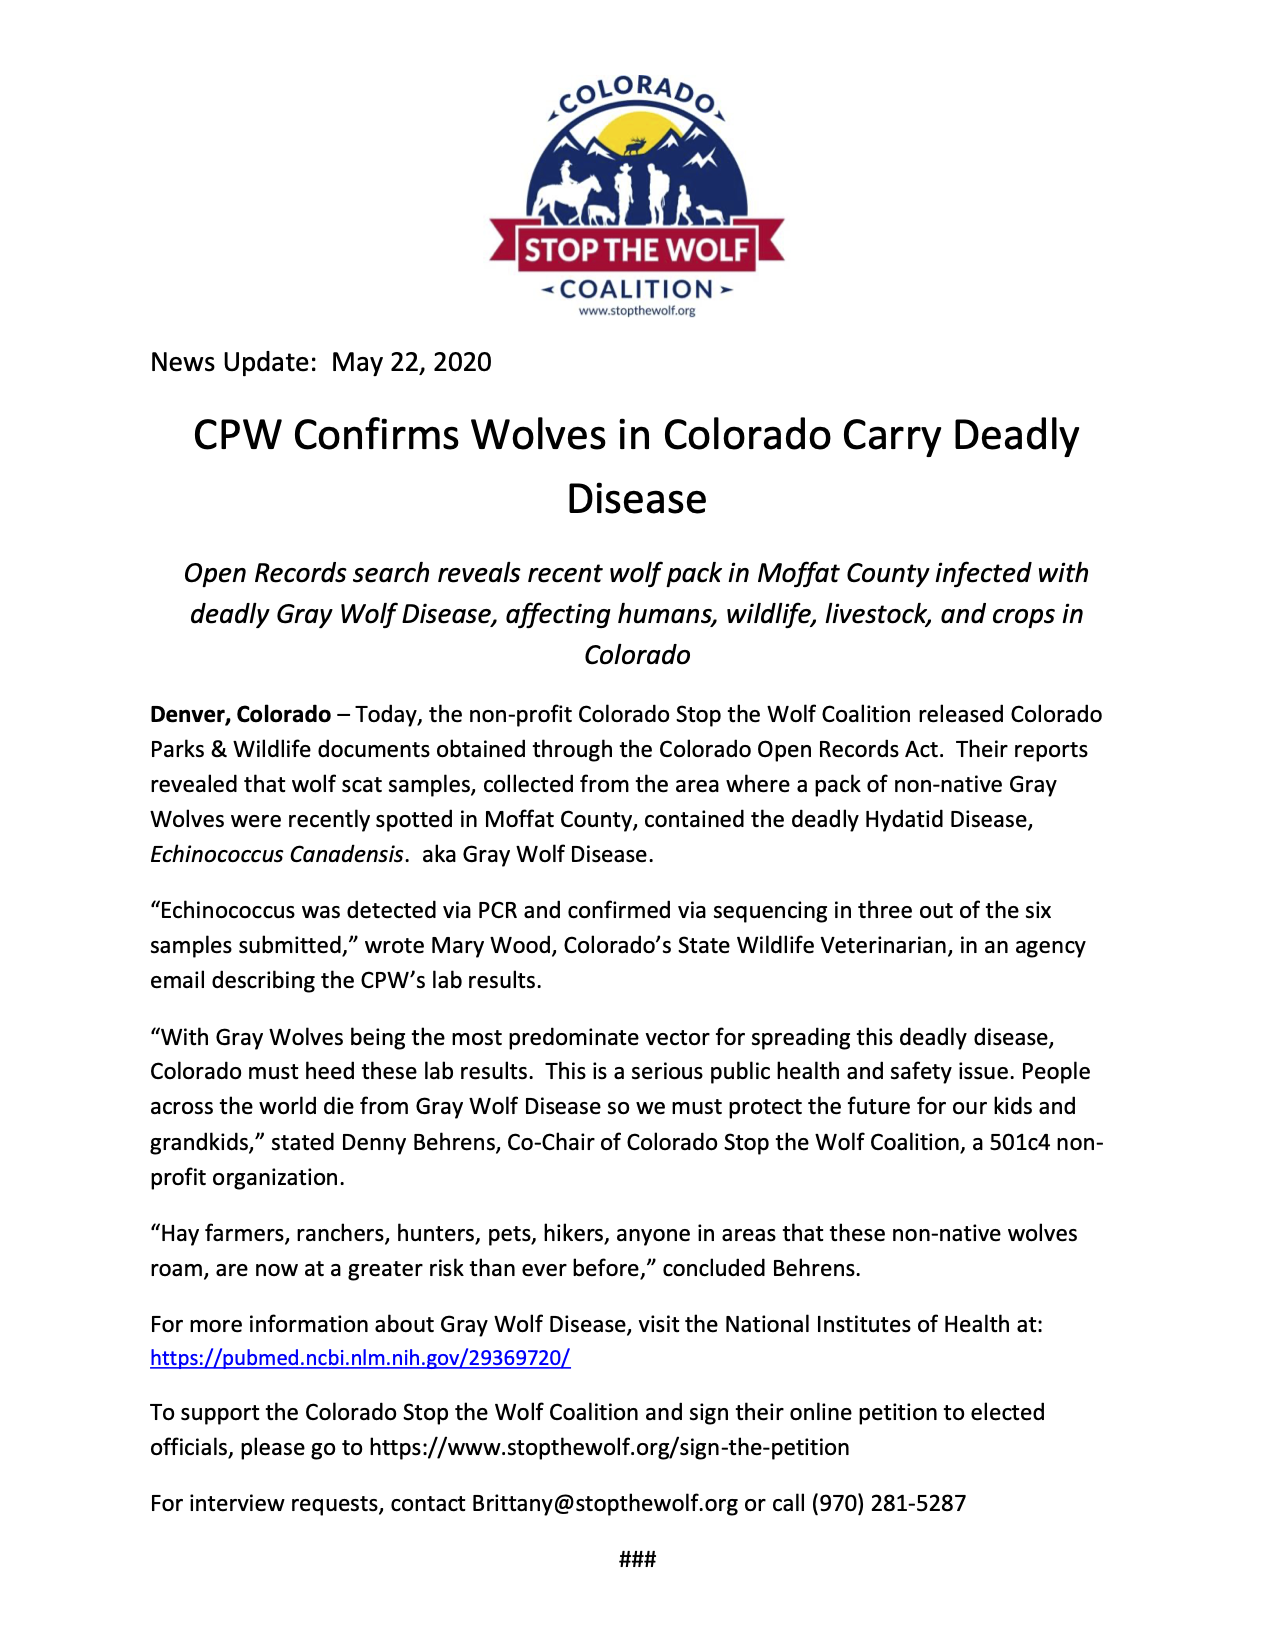 STWC Release CPW disease results 5-22-2020.png